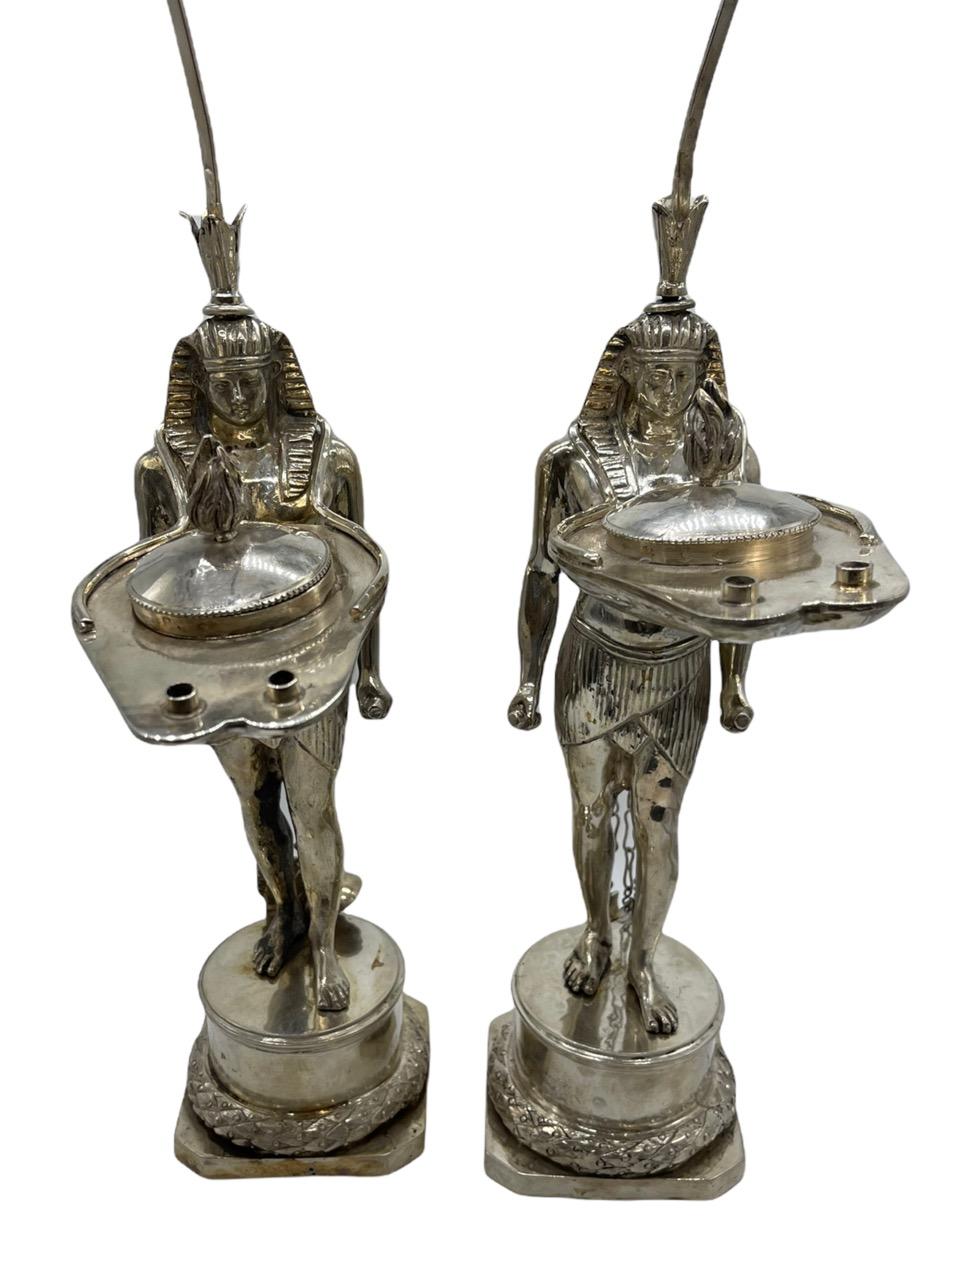 Pair of Early 19th Century Italian Antique Silver Oil Lamps by Vincenzo Belli II For Sale 6